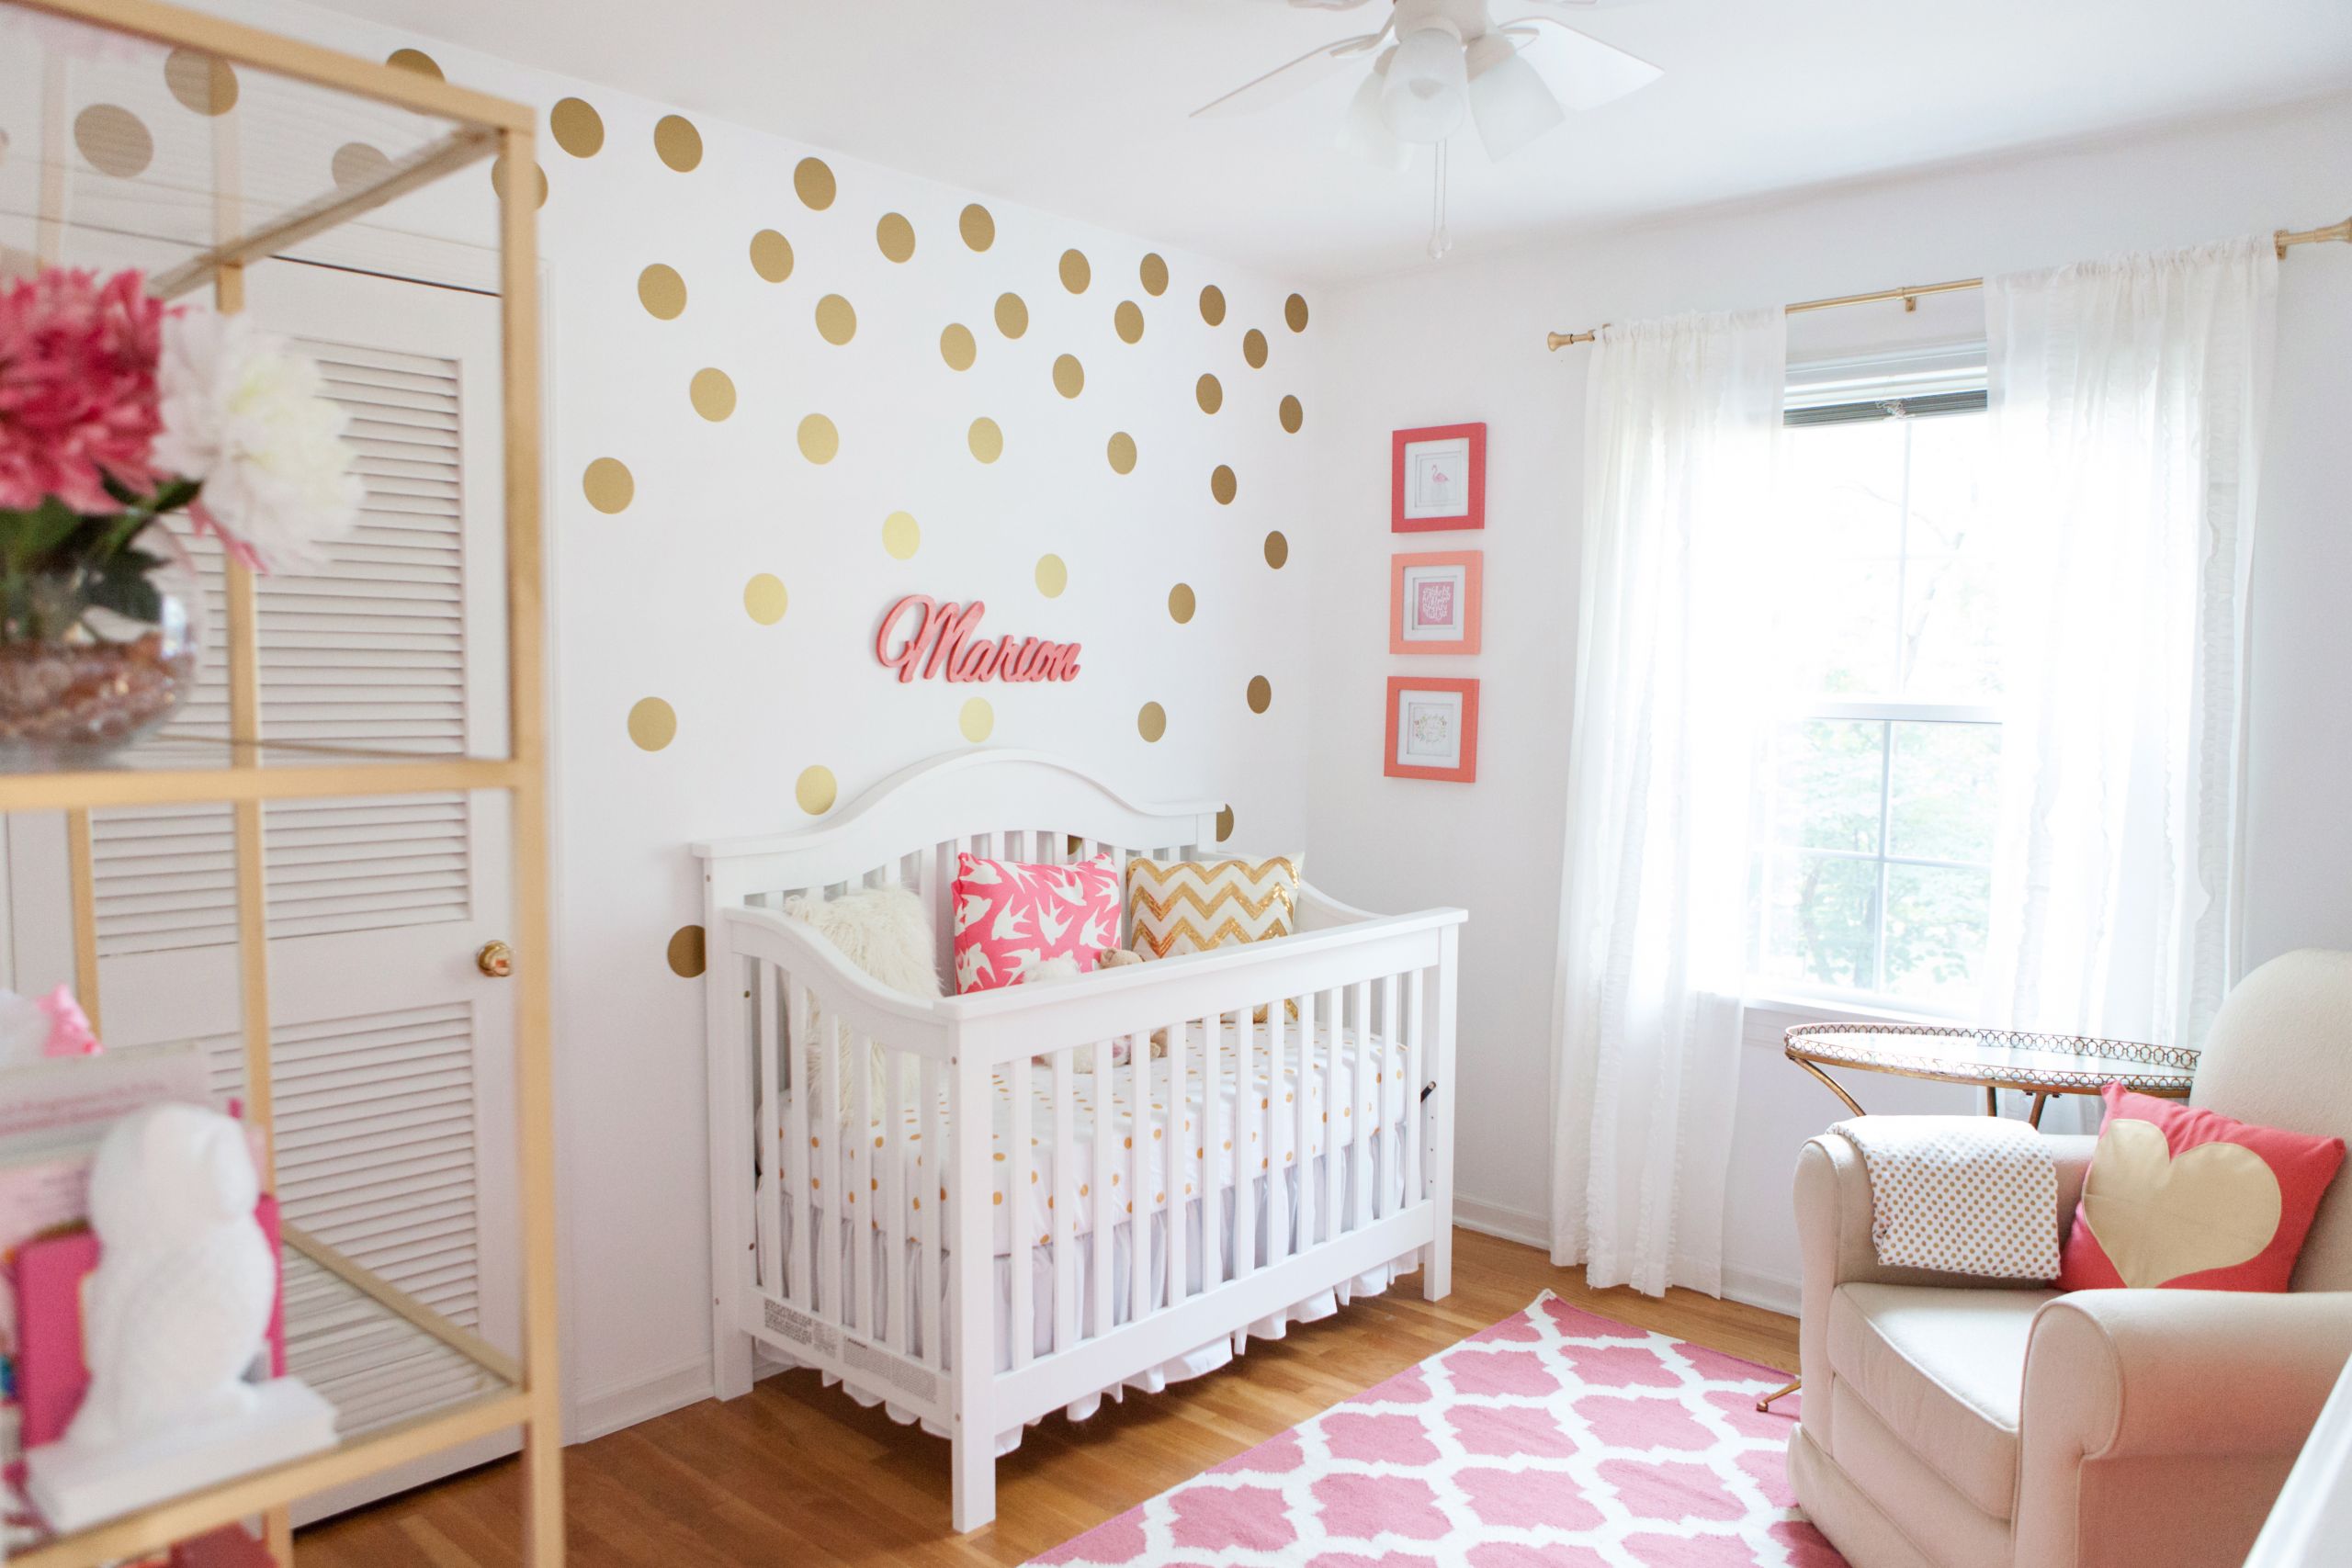 Newborn Baby Room Decoration
 Marion s Coral and Gold Polka Dot Nursery Project Nursery